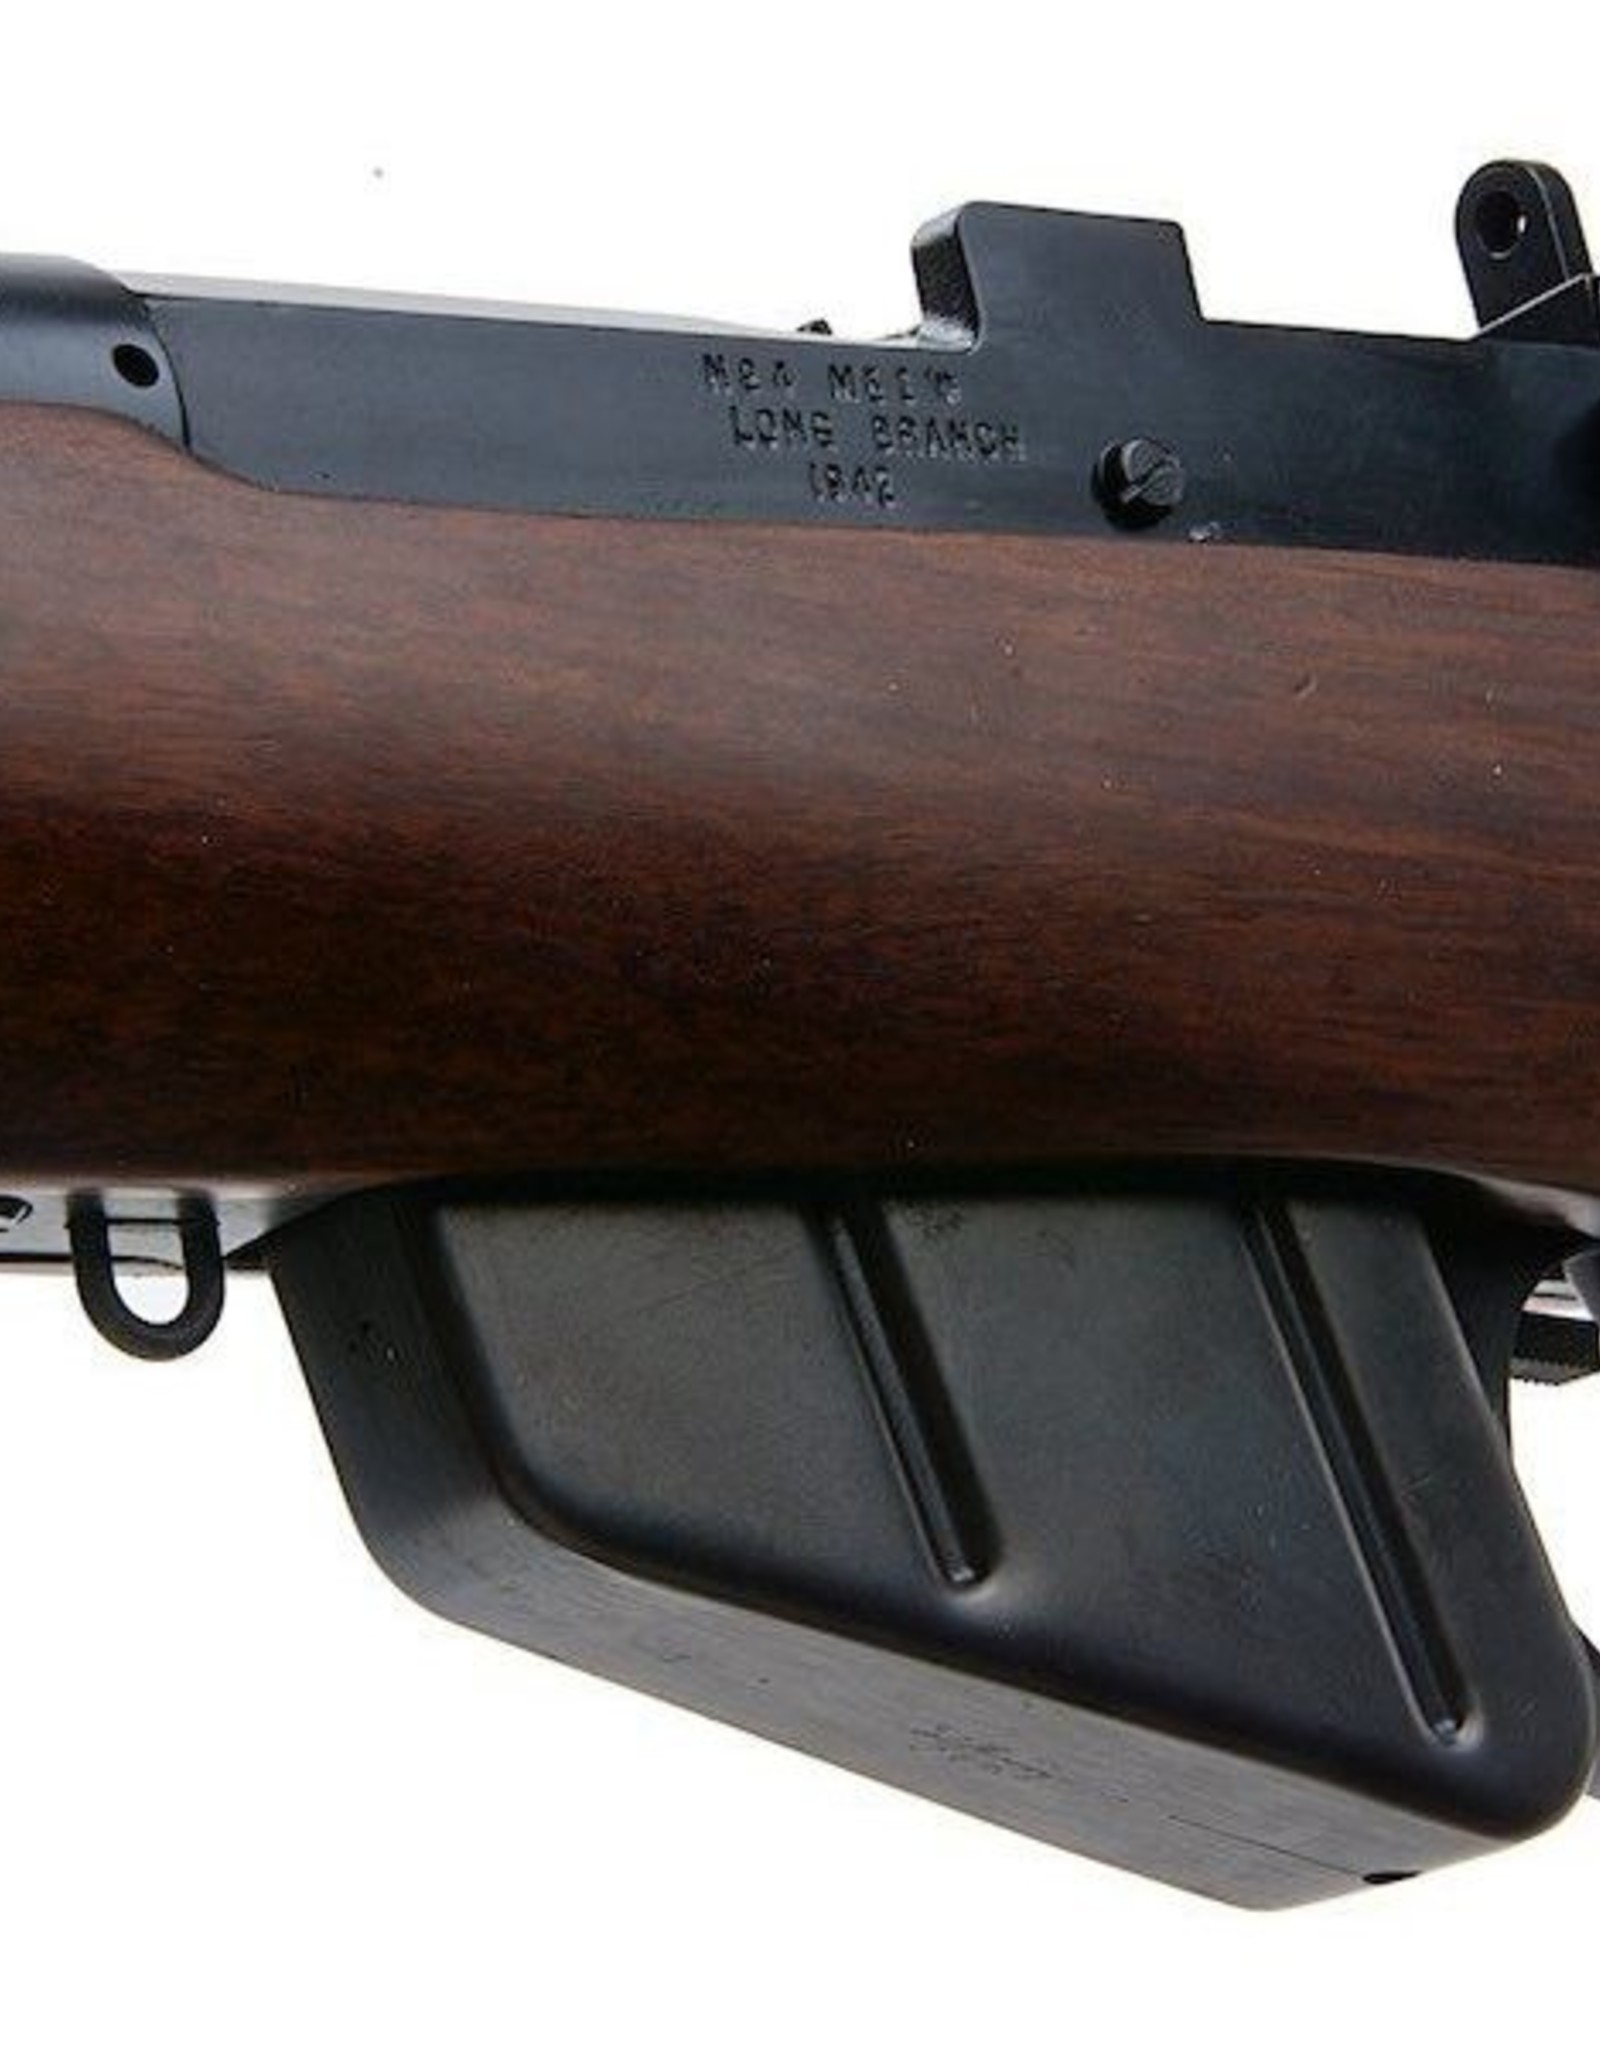 Ares Ares Classic Line SMLE British No. 4 MK1(T) (CLA-004)